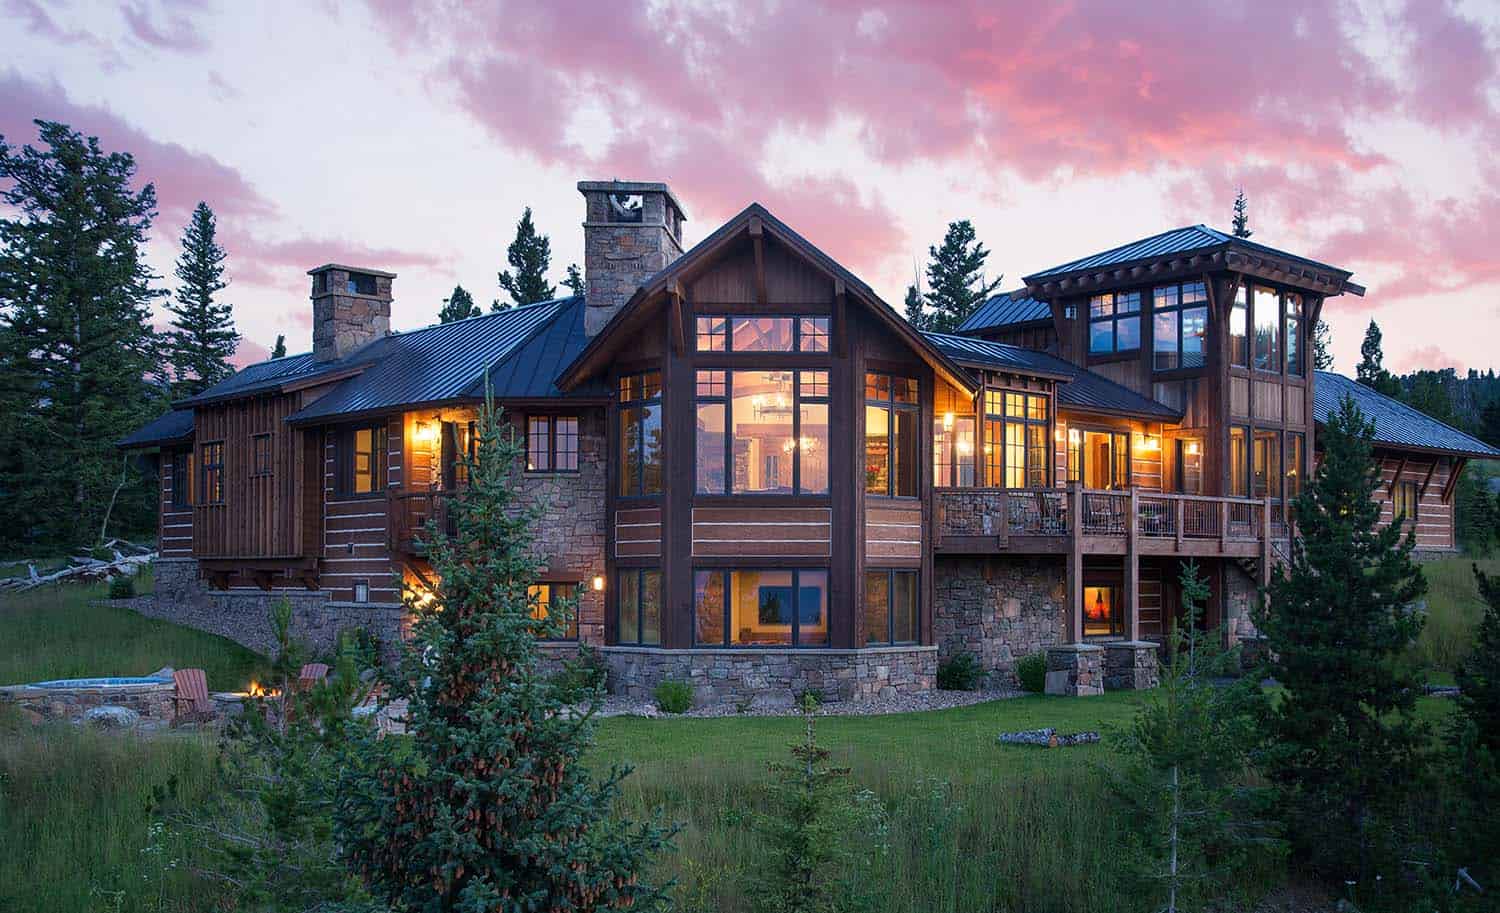 rustic timber frame mountain home exterior at dusk